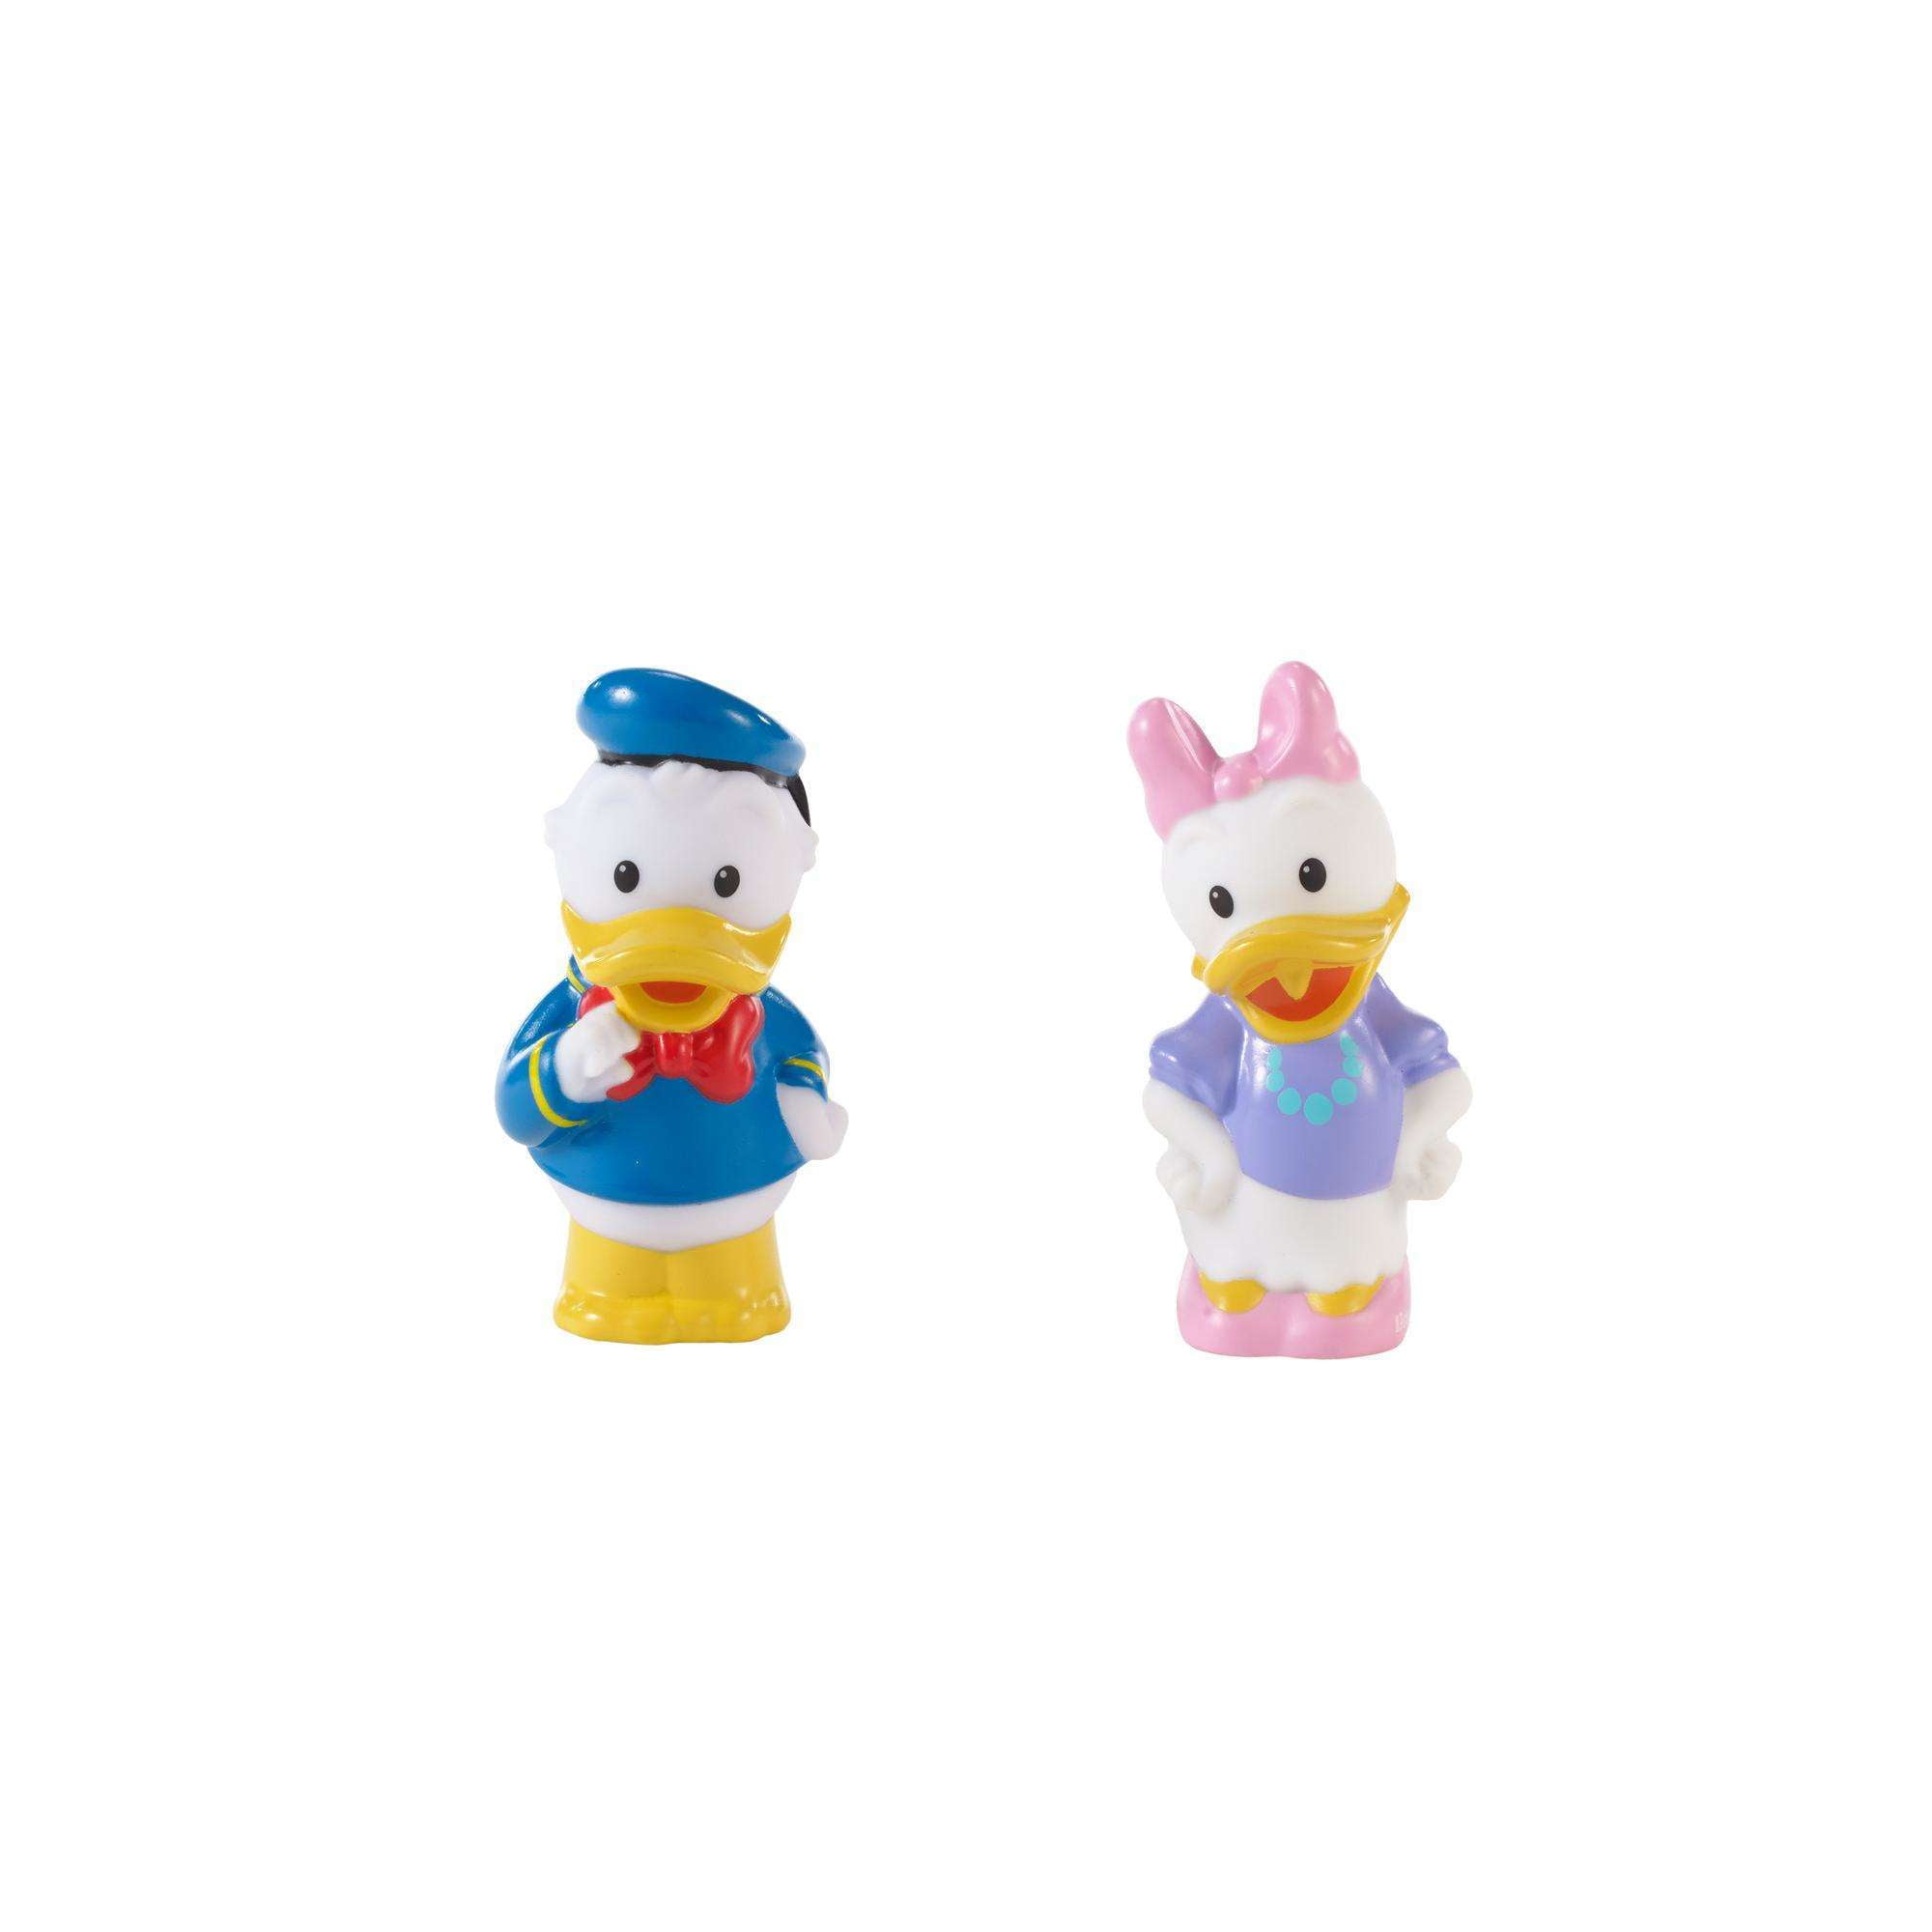 Details about   Fisher Price Little People DAISY DUCK Magic Kingdom Disney Palace w/ Hair Bow 